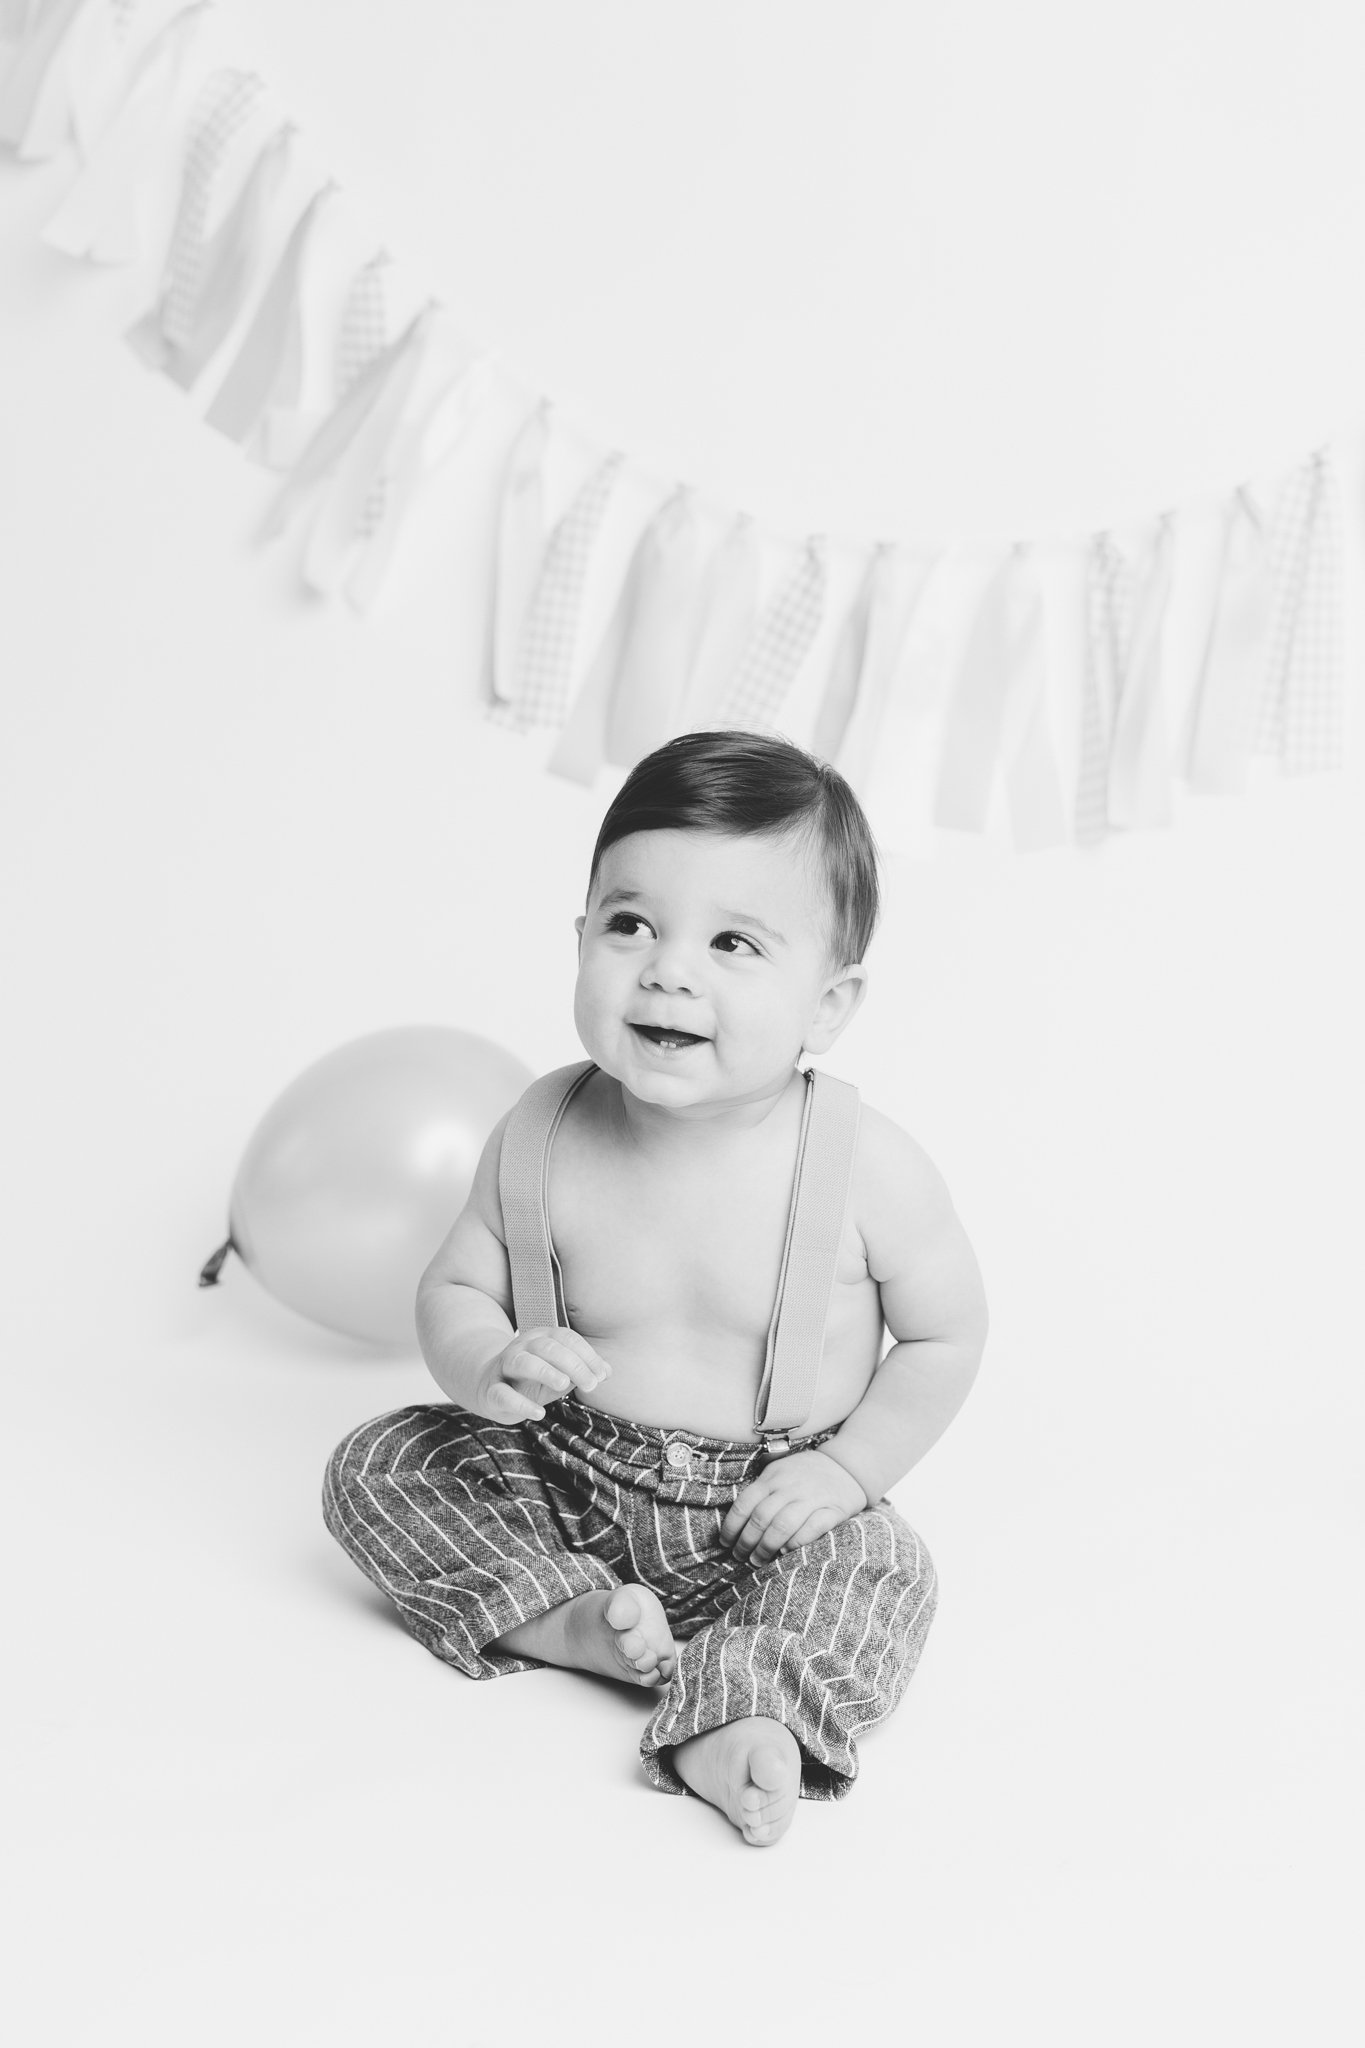 Simple_Minimal_Blue_White_Frist_Birthday_Boy_Smash_and_Splash_Session_Cake_Studio_by_Erika_Child_and_Family_Photographer_for_Christie_Leigh_Photo_in_Warren_OH_Ohio_Trumbull_County_002.jpg